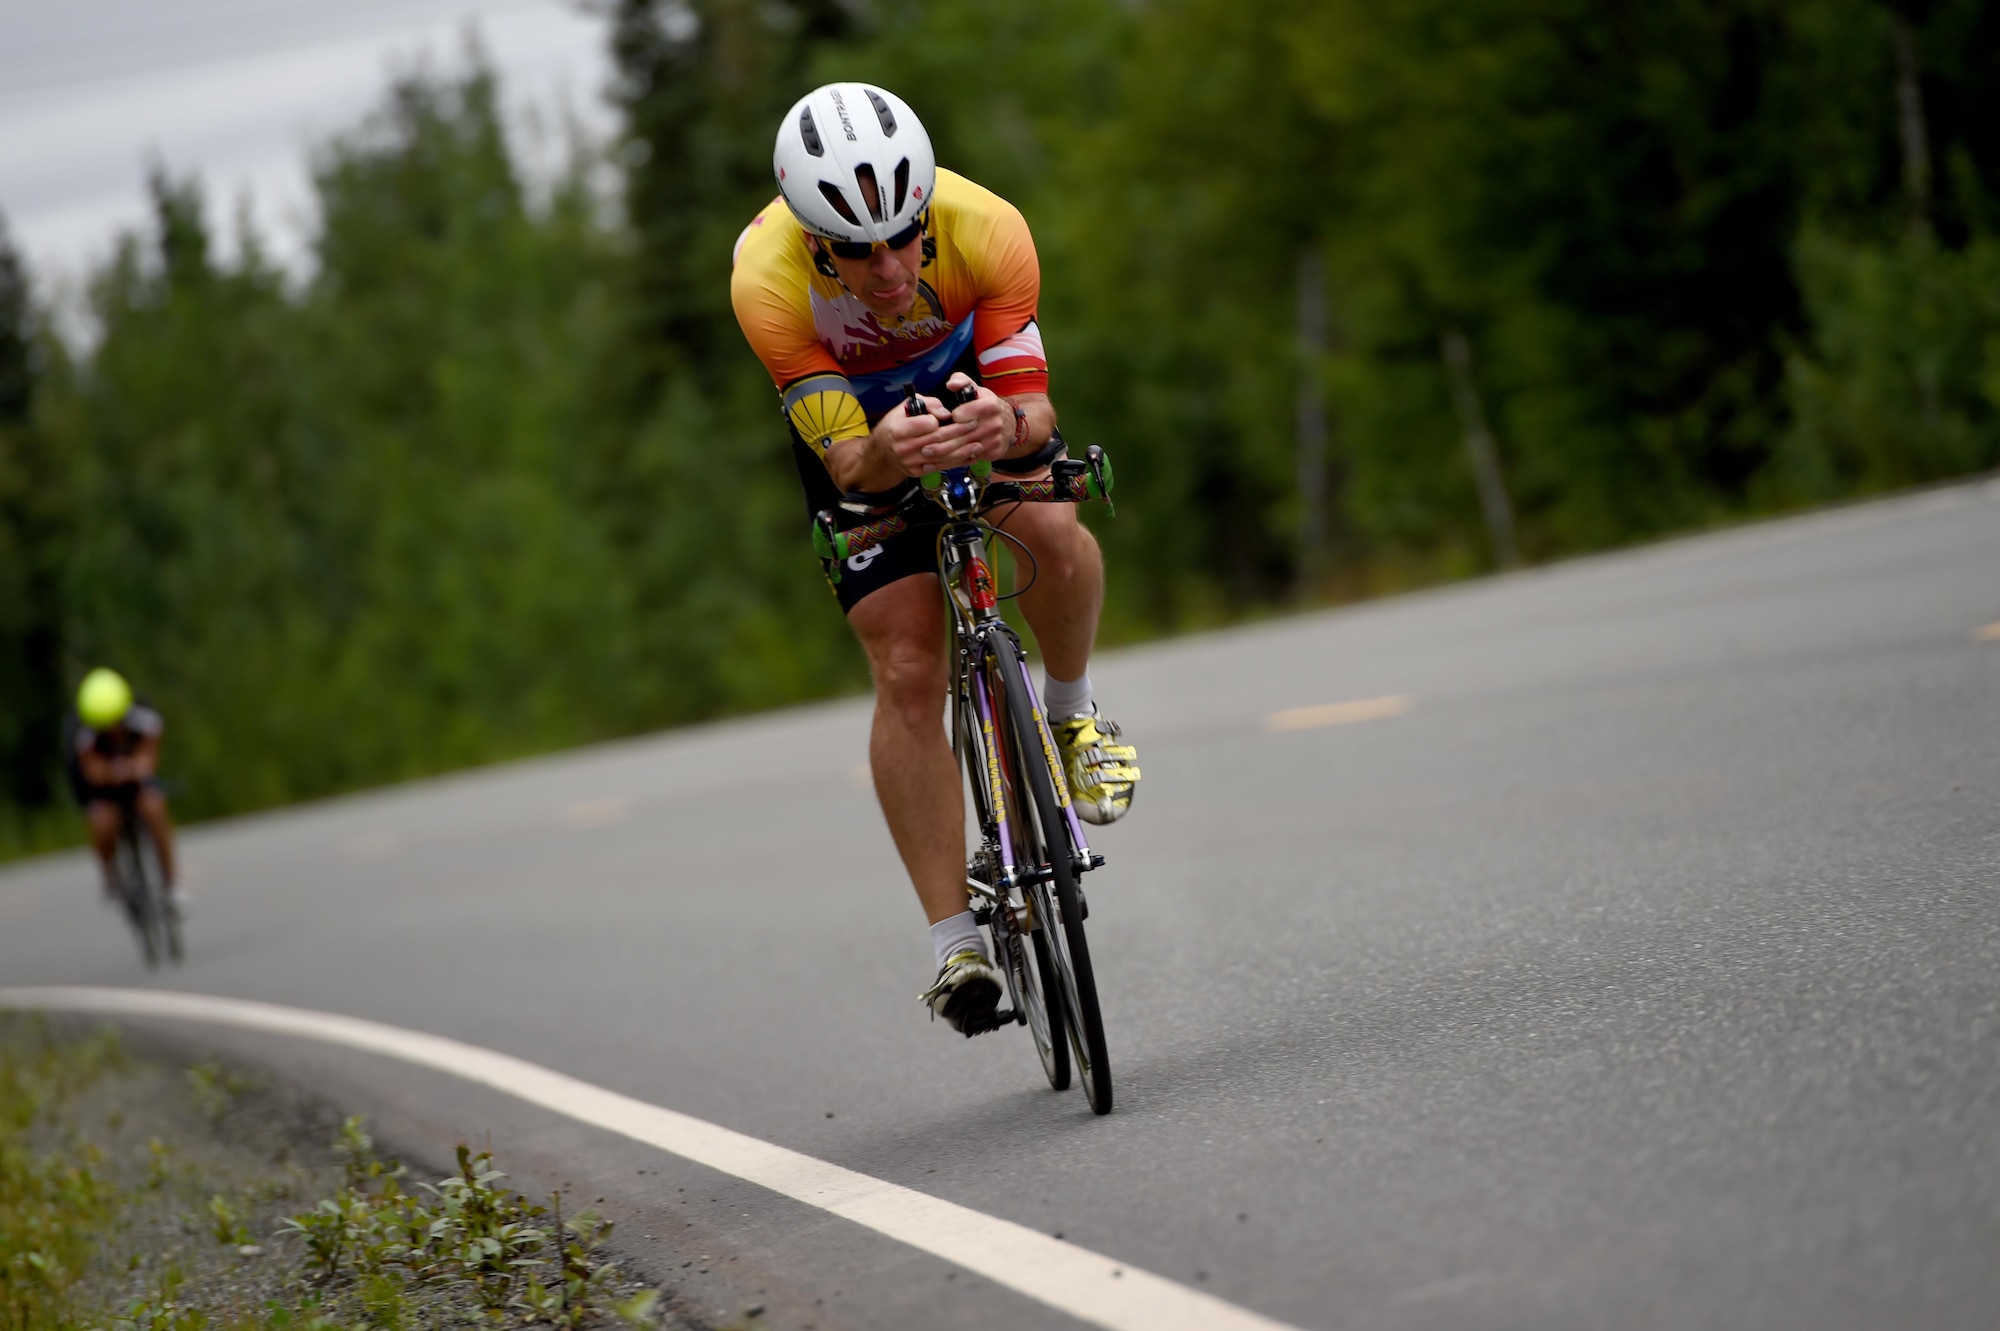 The Arctic Bicycle Club hosted a 10-mile time-trial race at the Moose Run Country Club at Joint Base Elmendorf-Richardson, Alaska, Aug. 3, 2017. For more than 15 years, the club has hosted road race events at JBER.